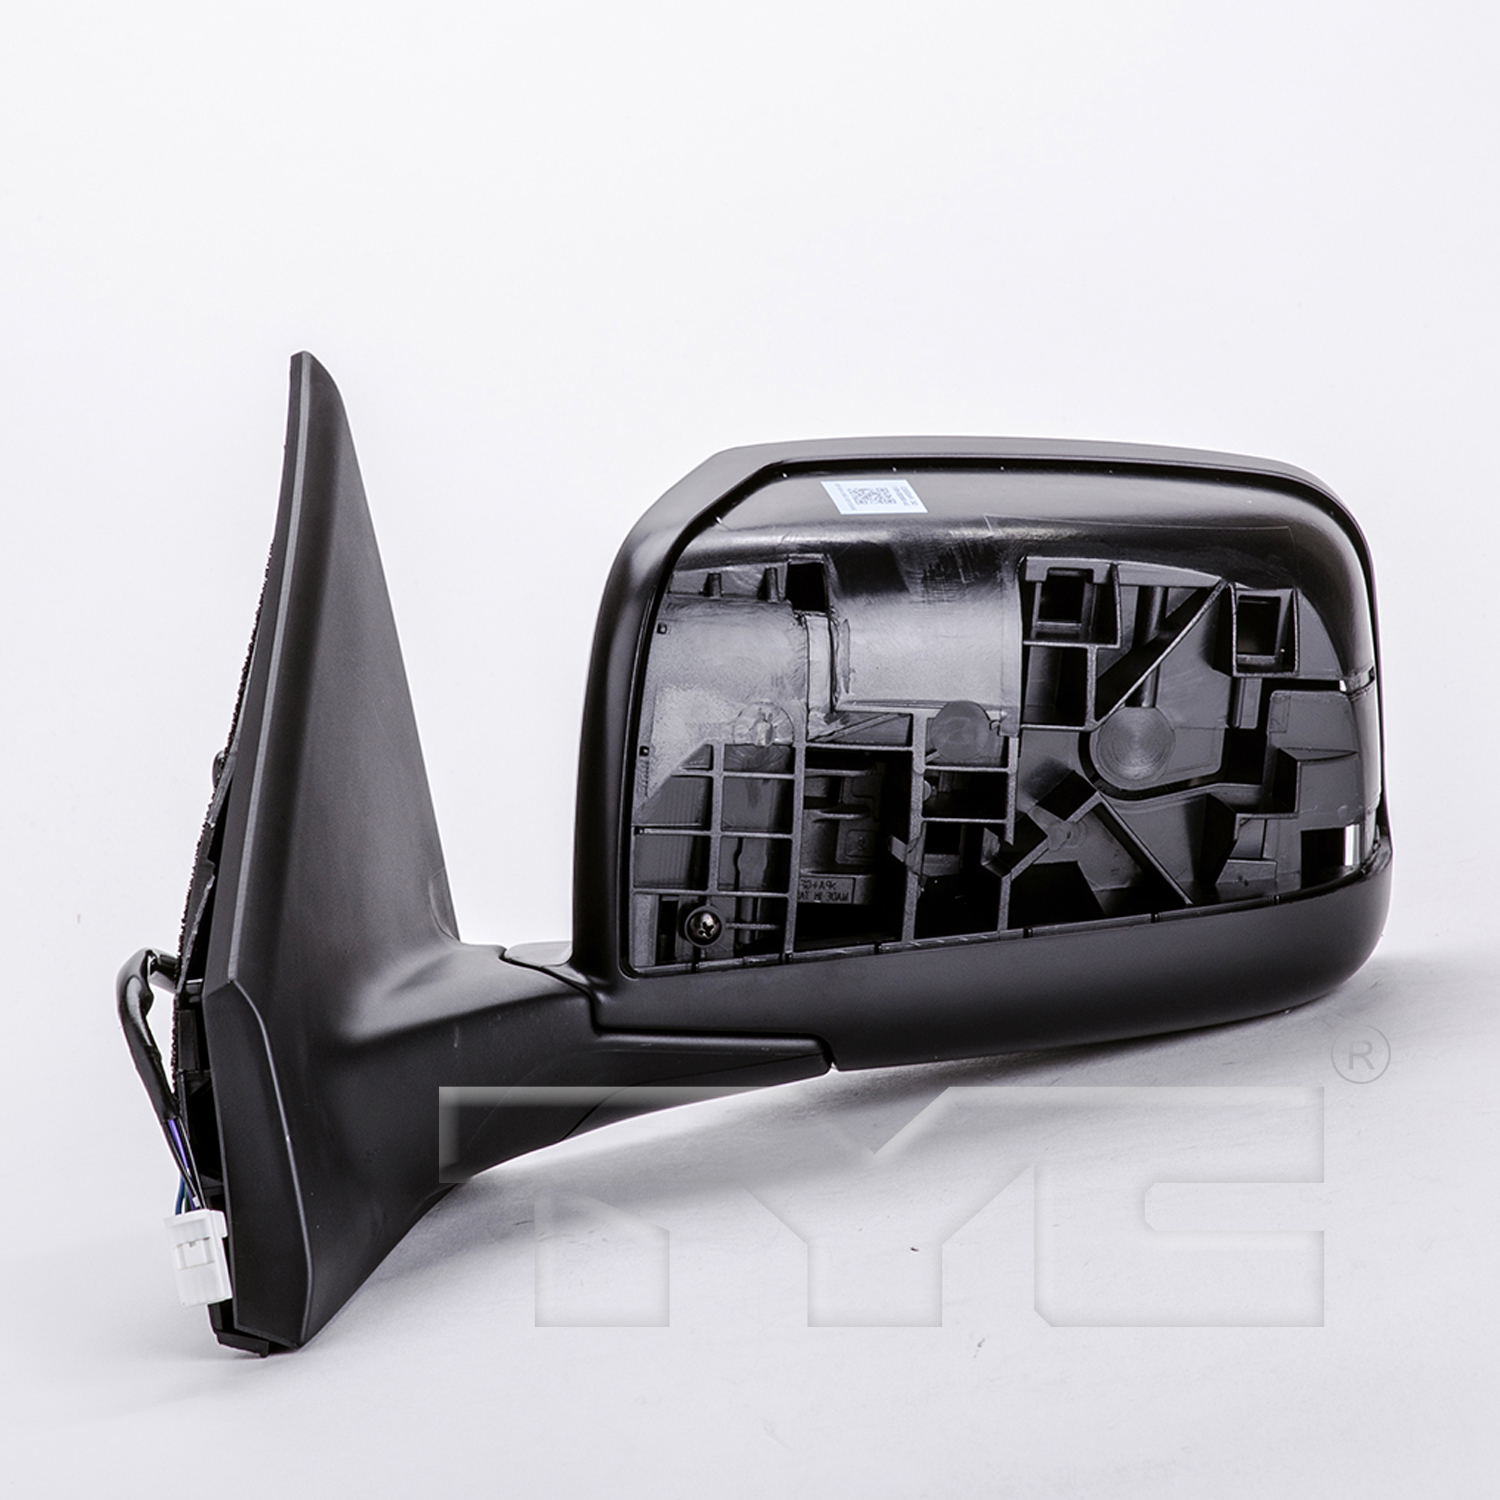 Aftermarket MIRRORS for NISSAN - ROGUE, ROGUE,08-13,LT Mirror outside rear view